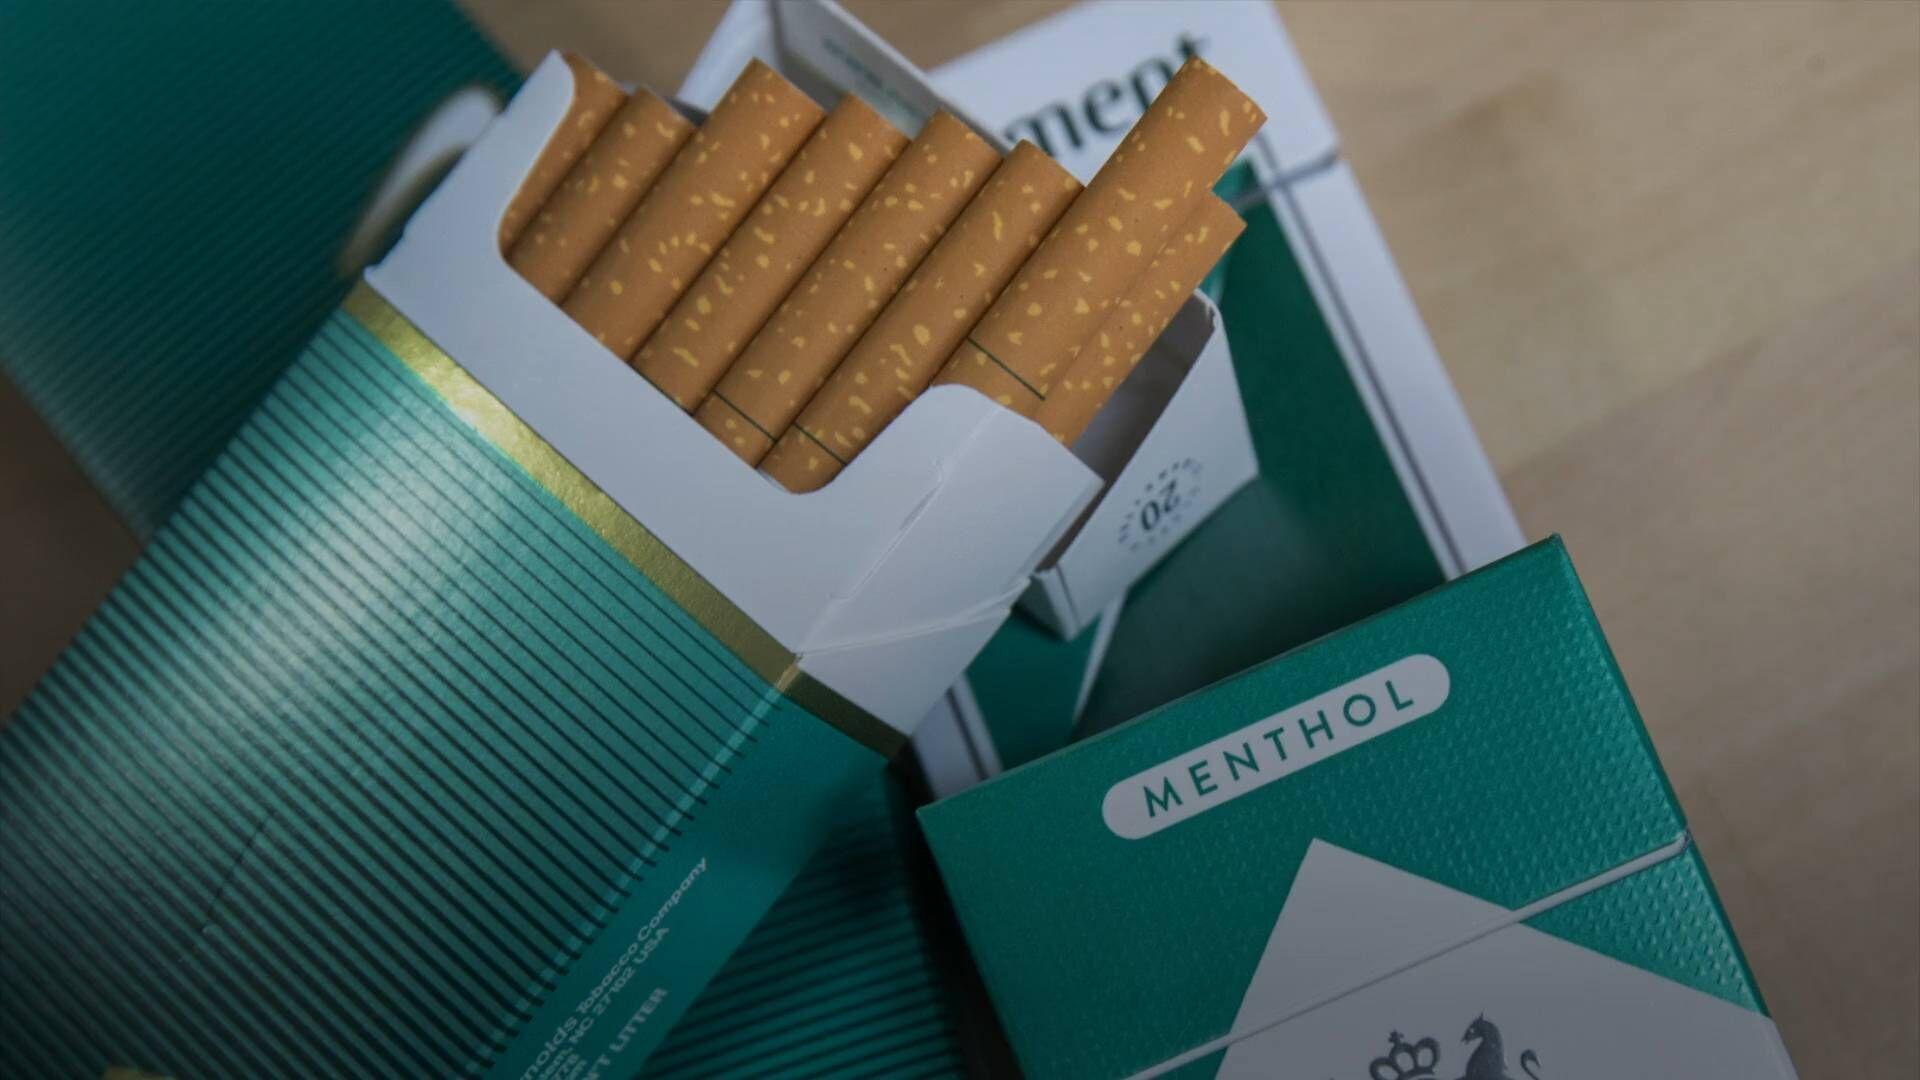 FDA Proposes Ban on Menthol Cigarettes and Flavored Cigars